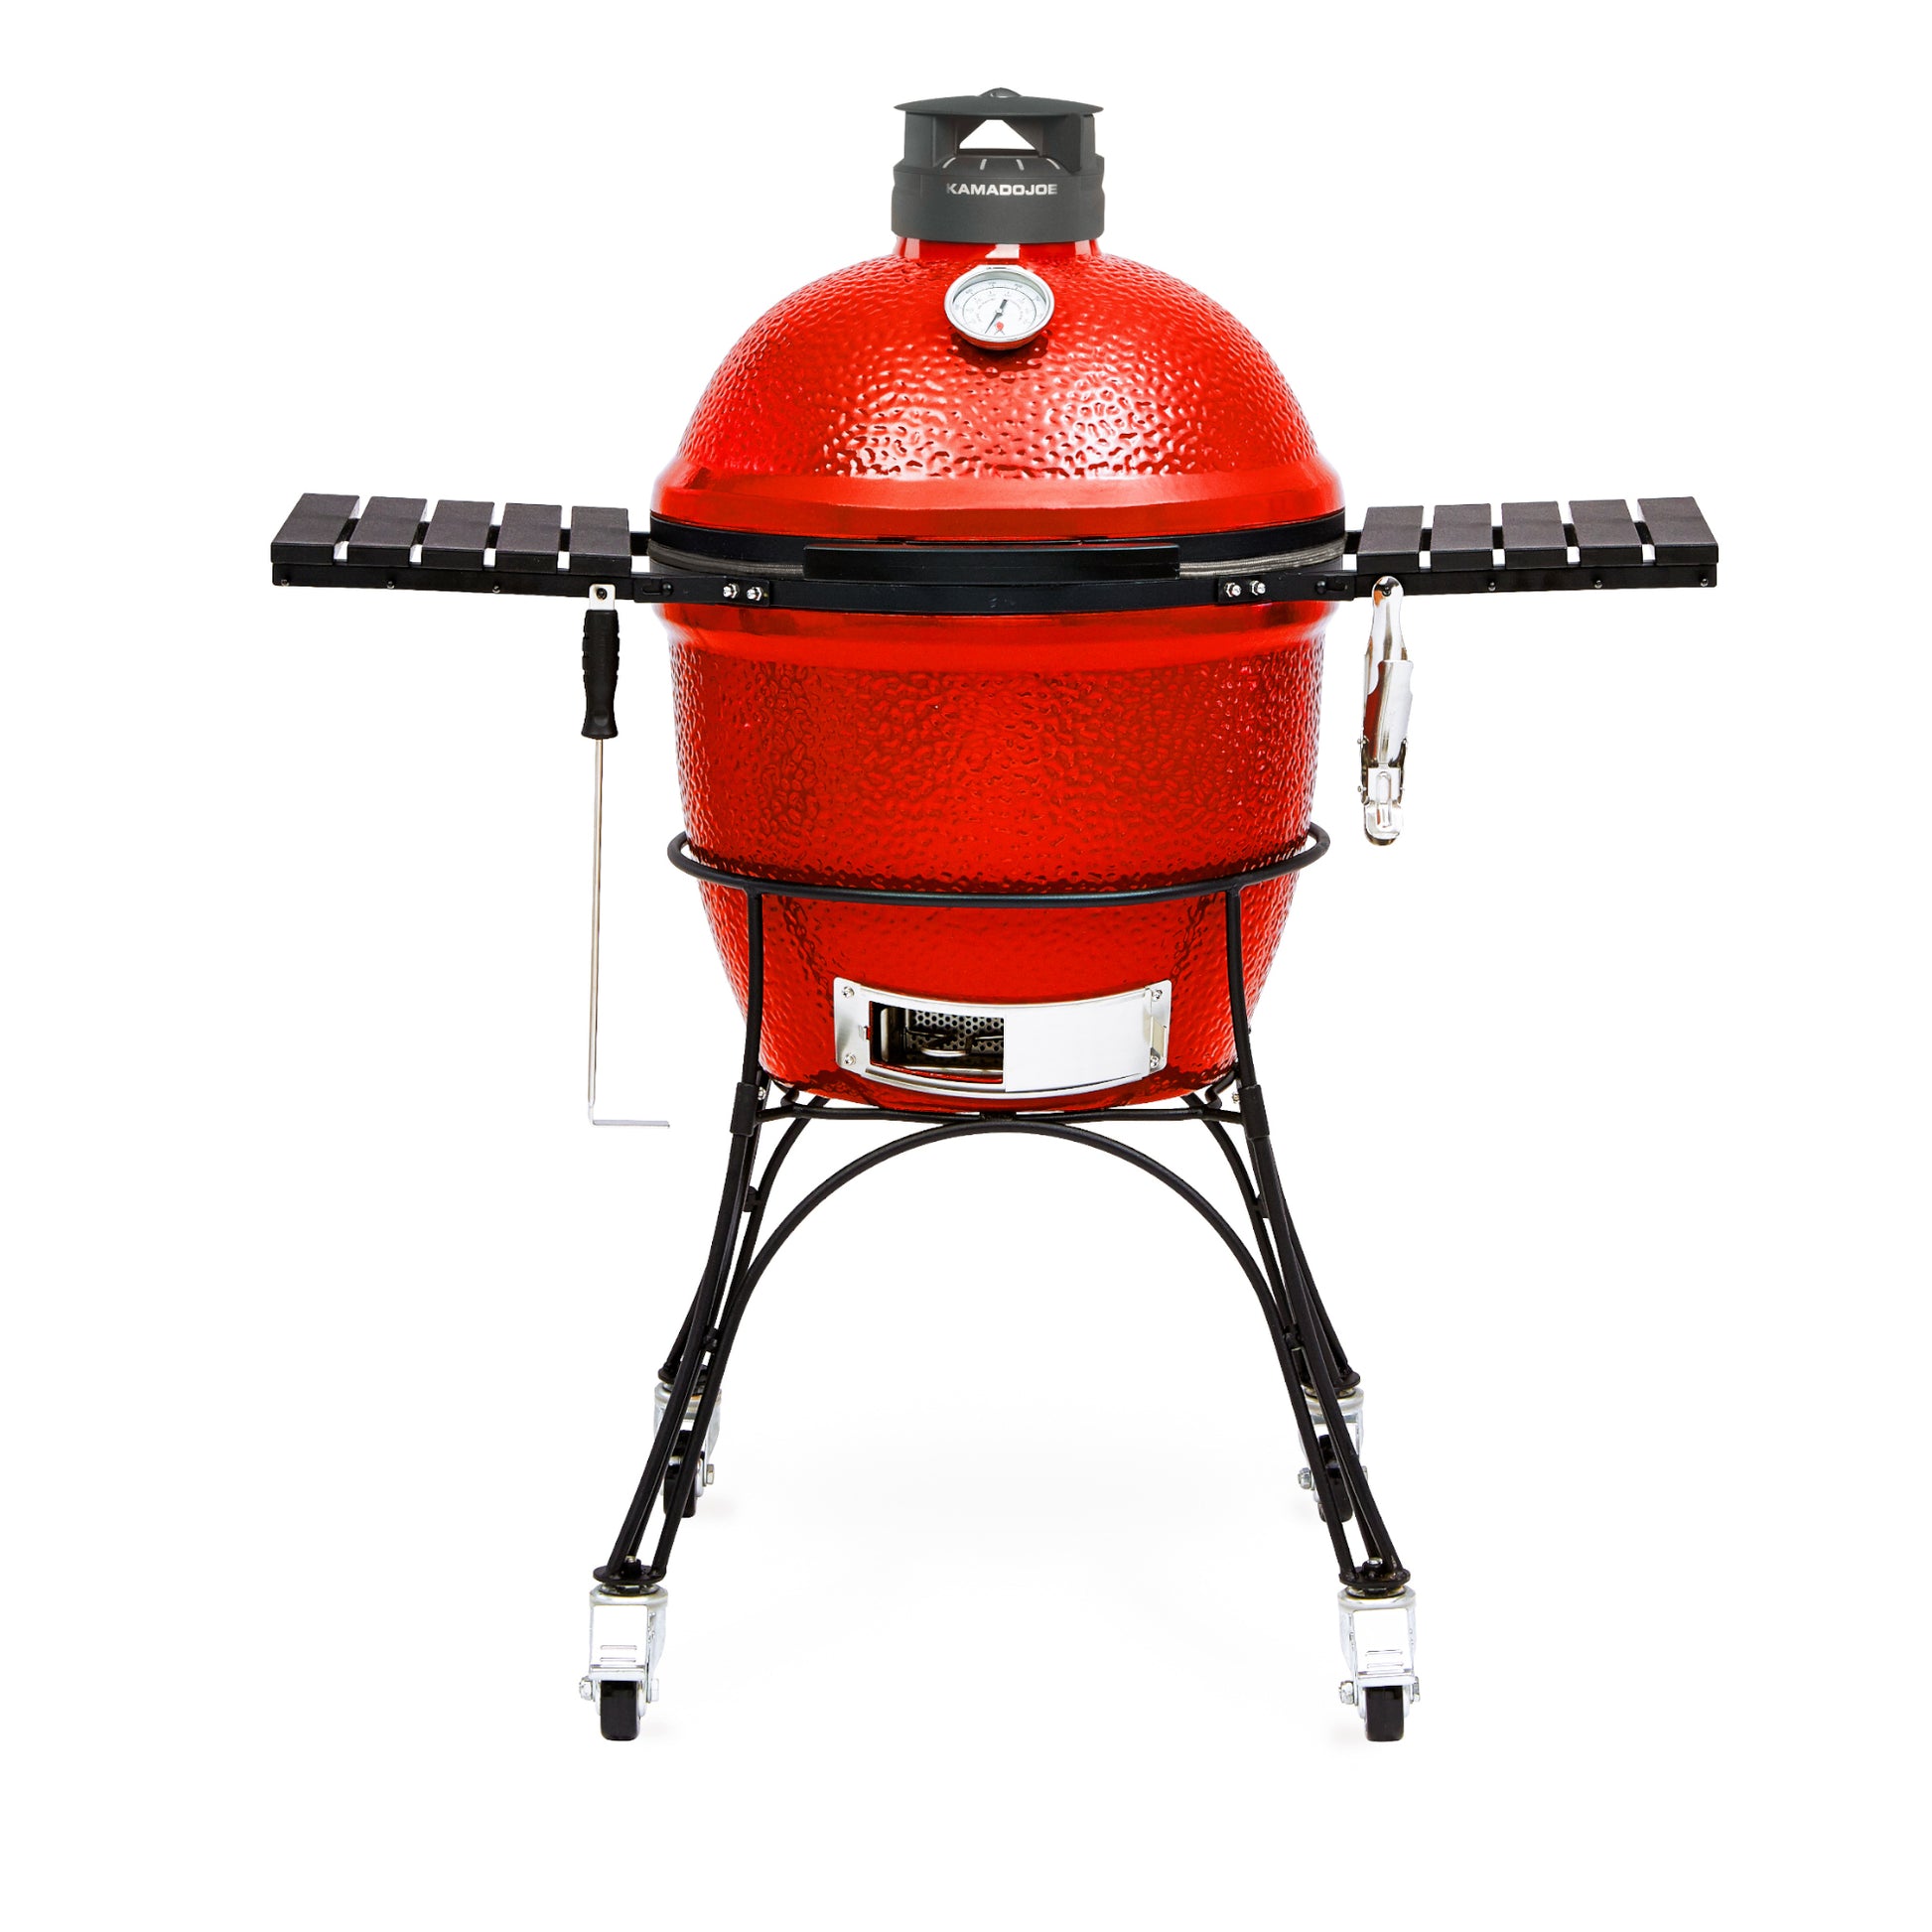 Small red grill